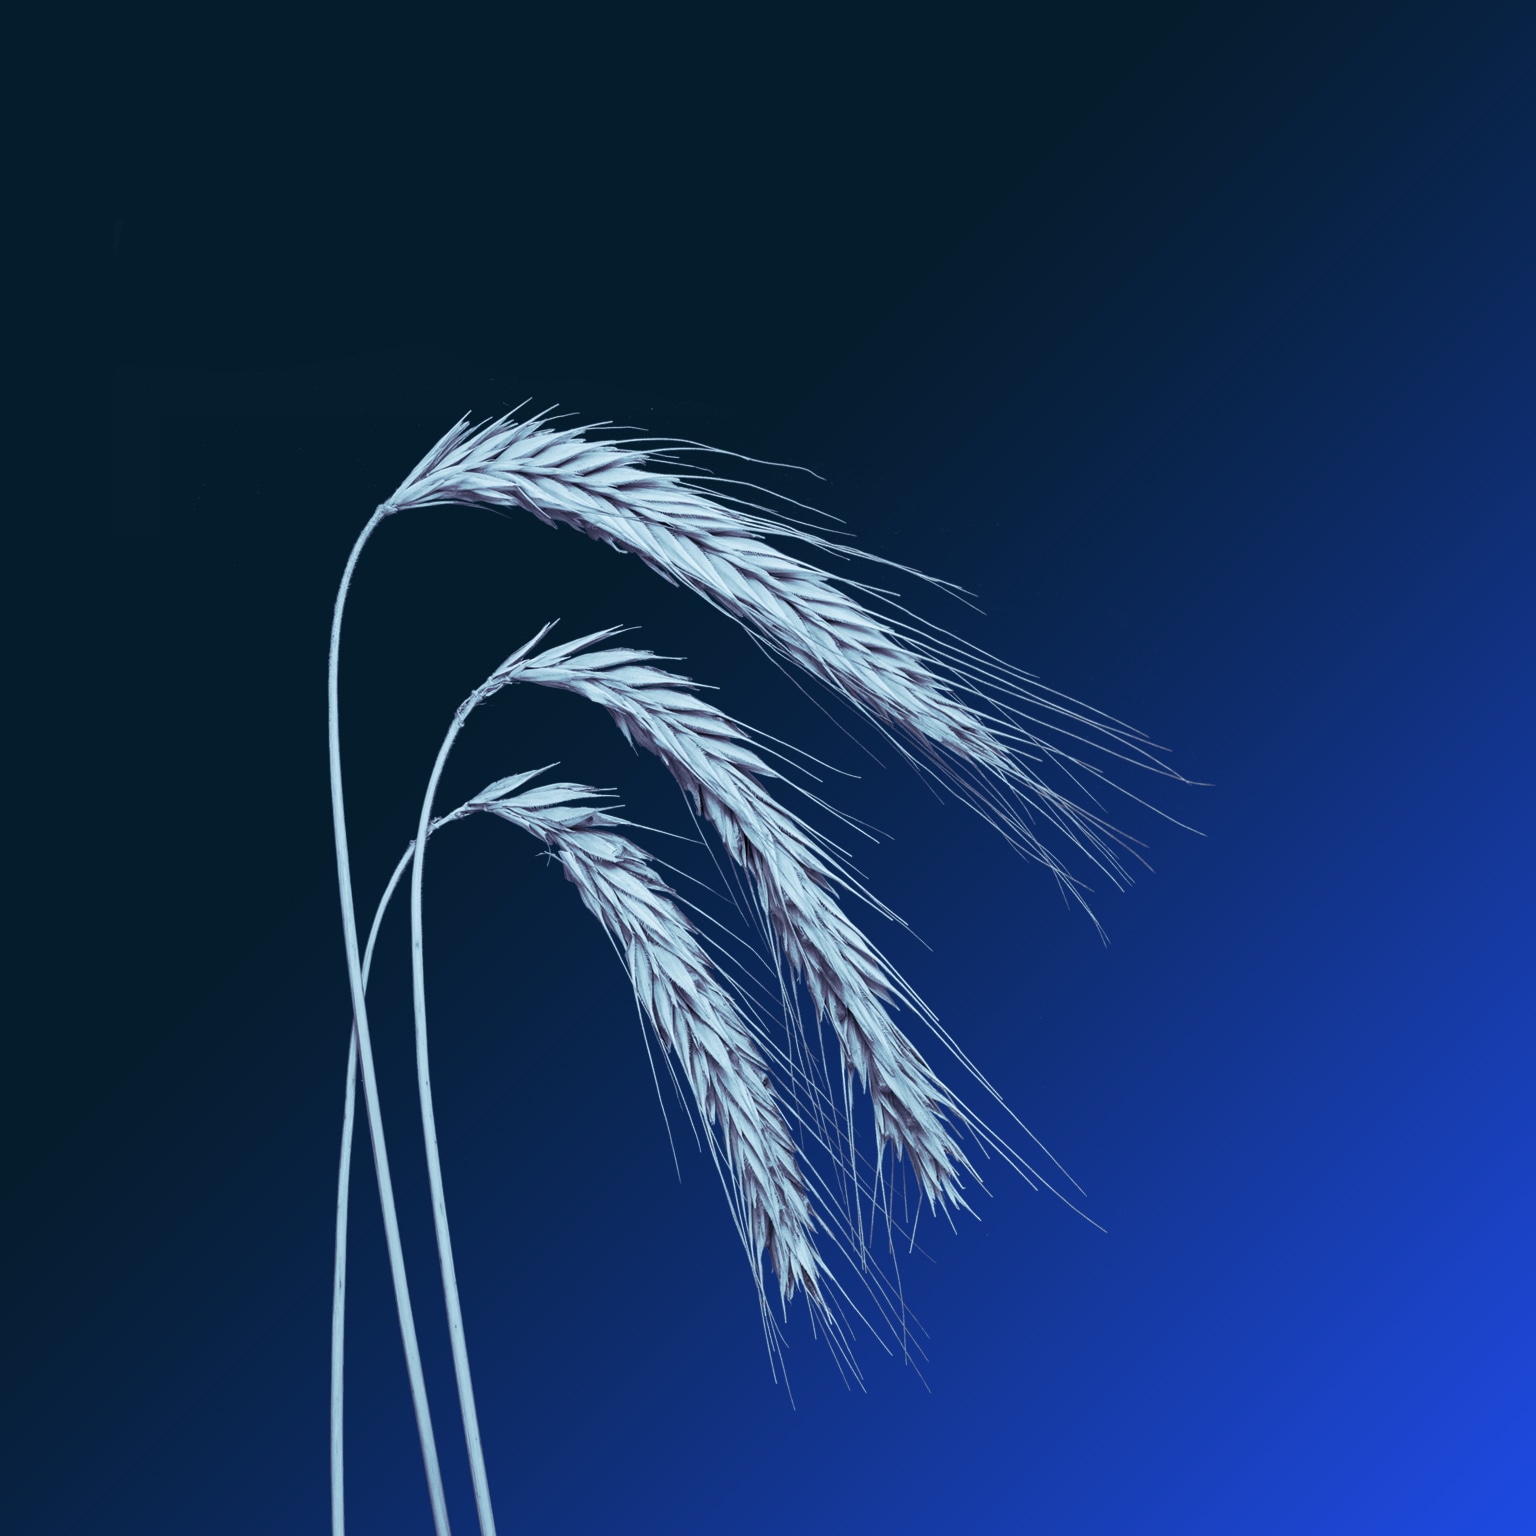 Three wheat spikelets